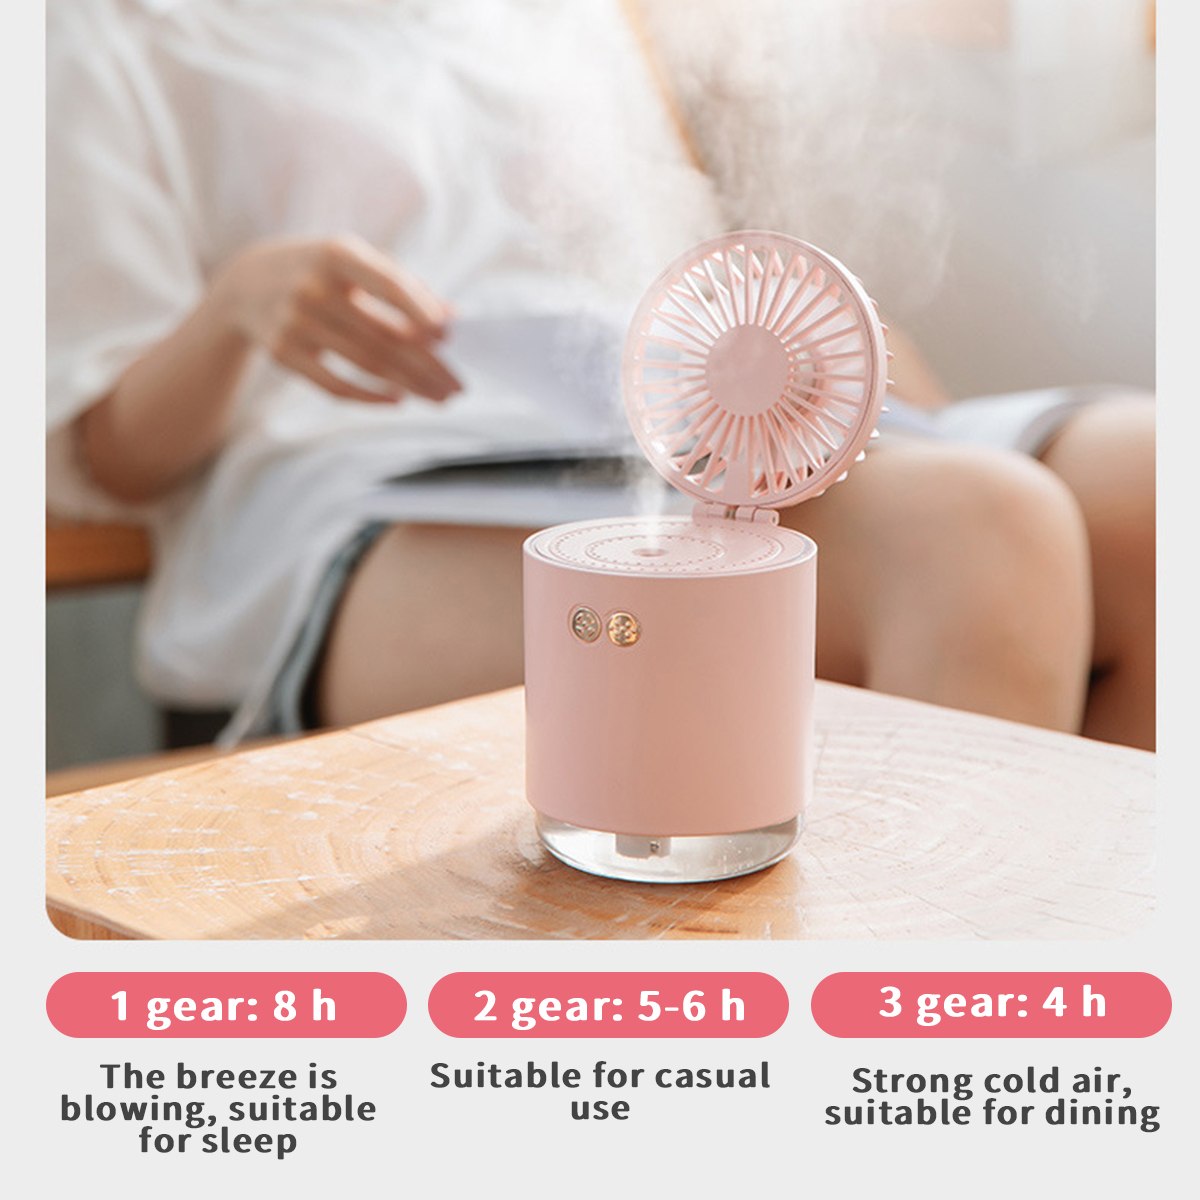 Multifunctional-2000mAh-Mini-USB-Rechargeable-Fan-Cooler-Desktop-Spray-Humidification-with-Colorful--1864518-11